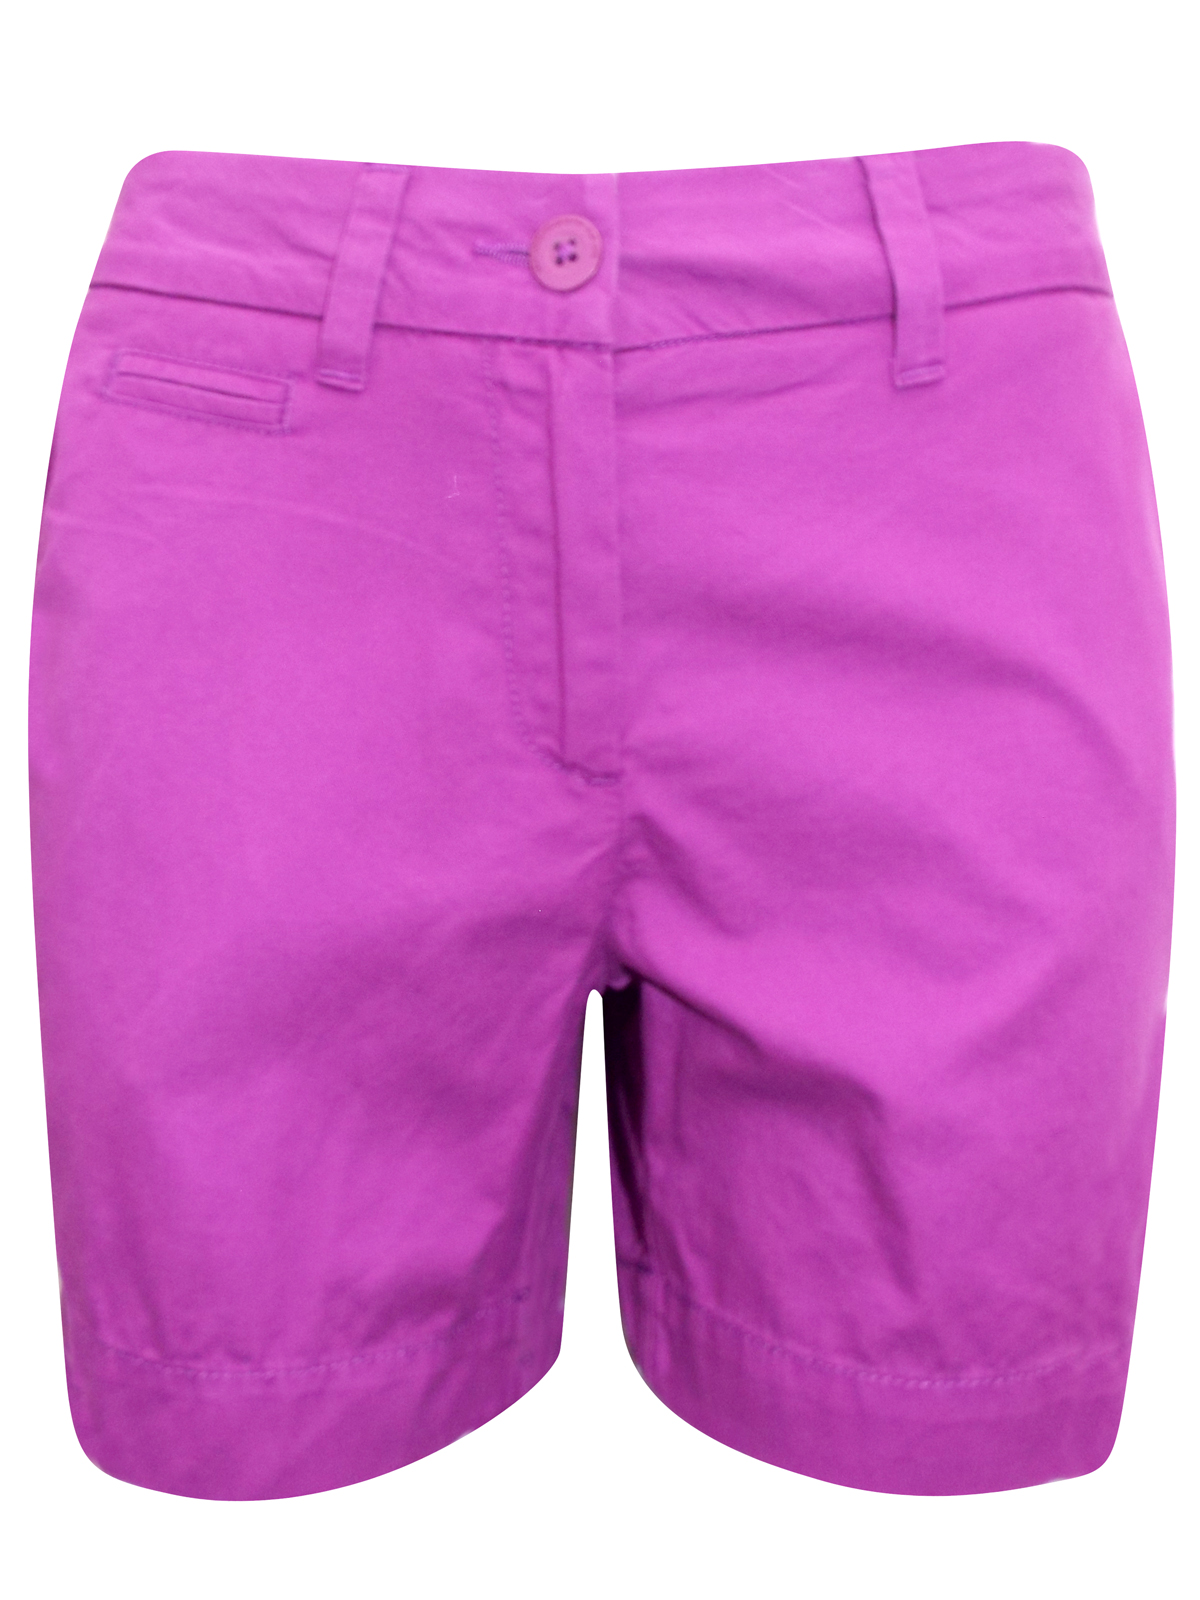 Marks and Spencer - - M&5 VIOLET Pure Cotton Chino Shorts - Size 8